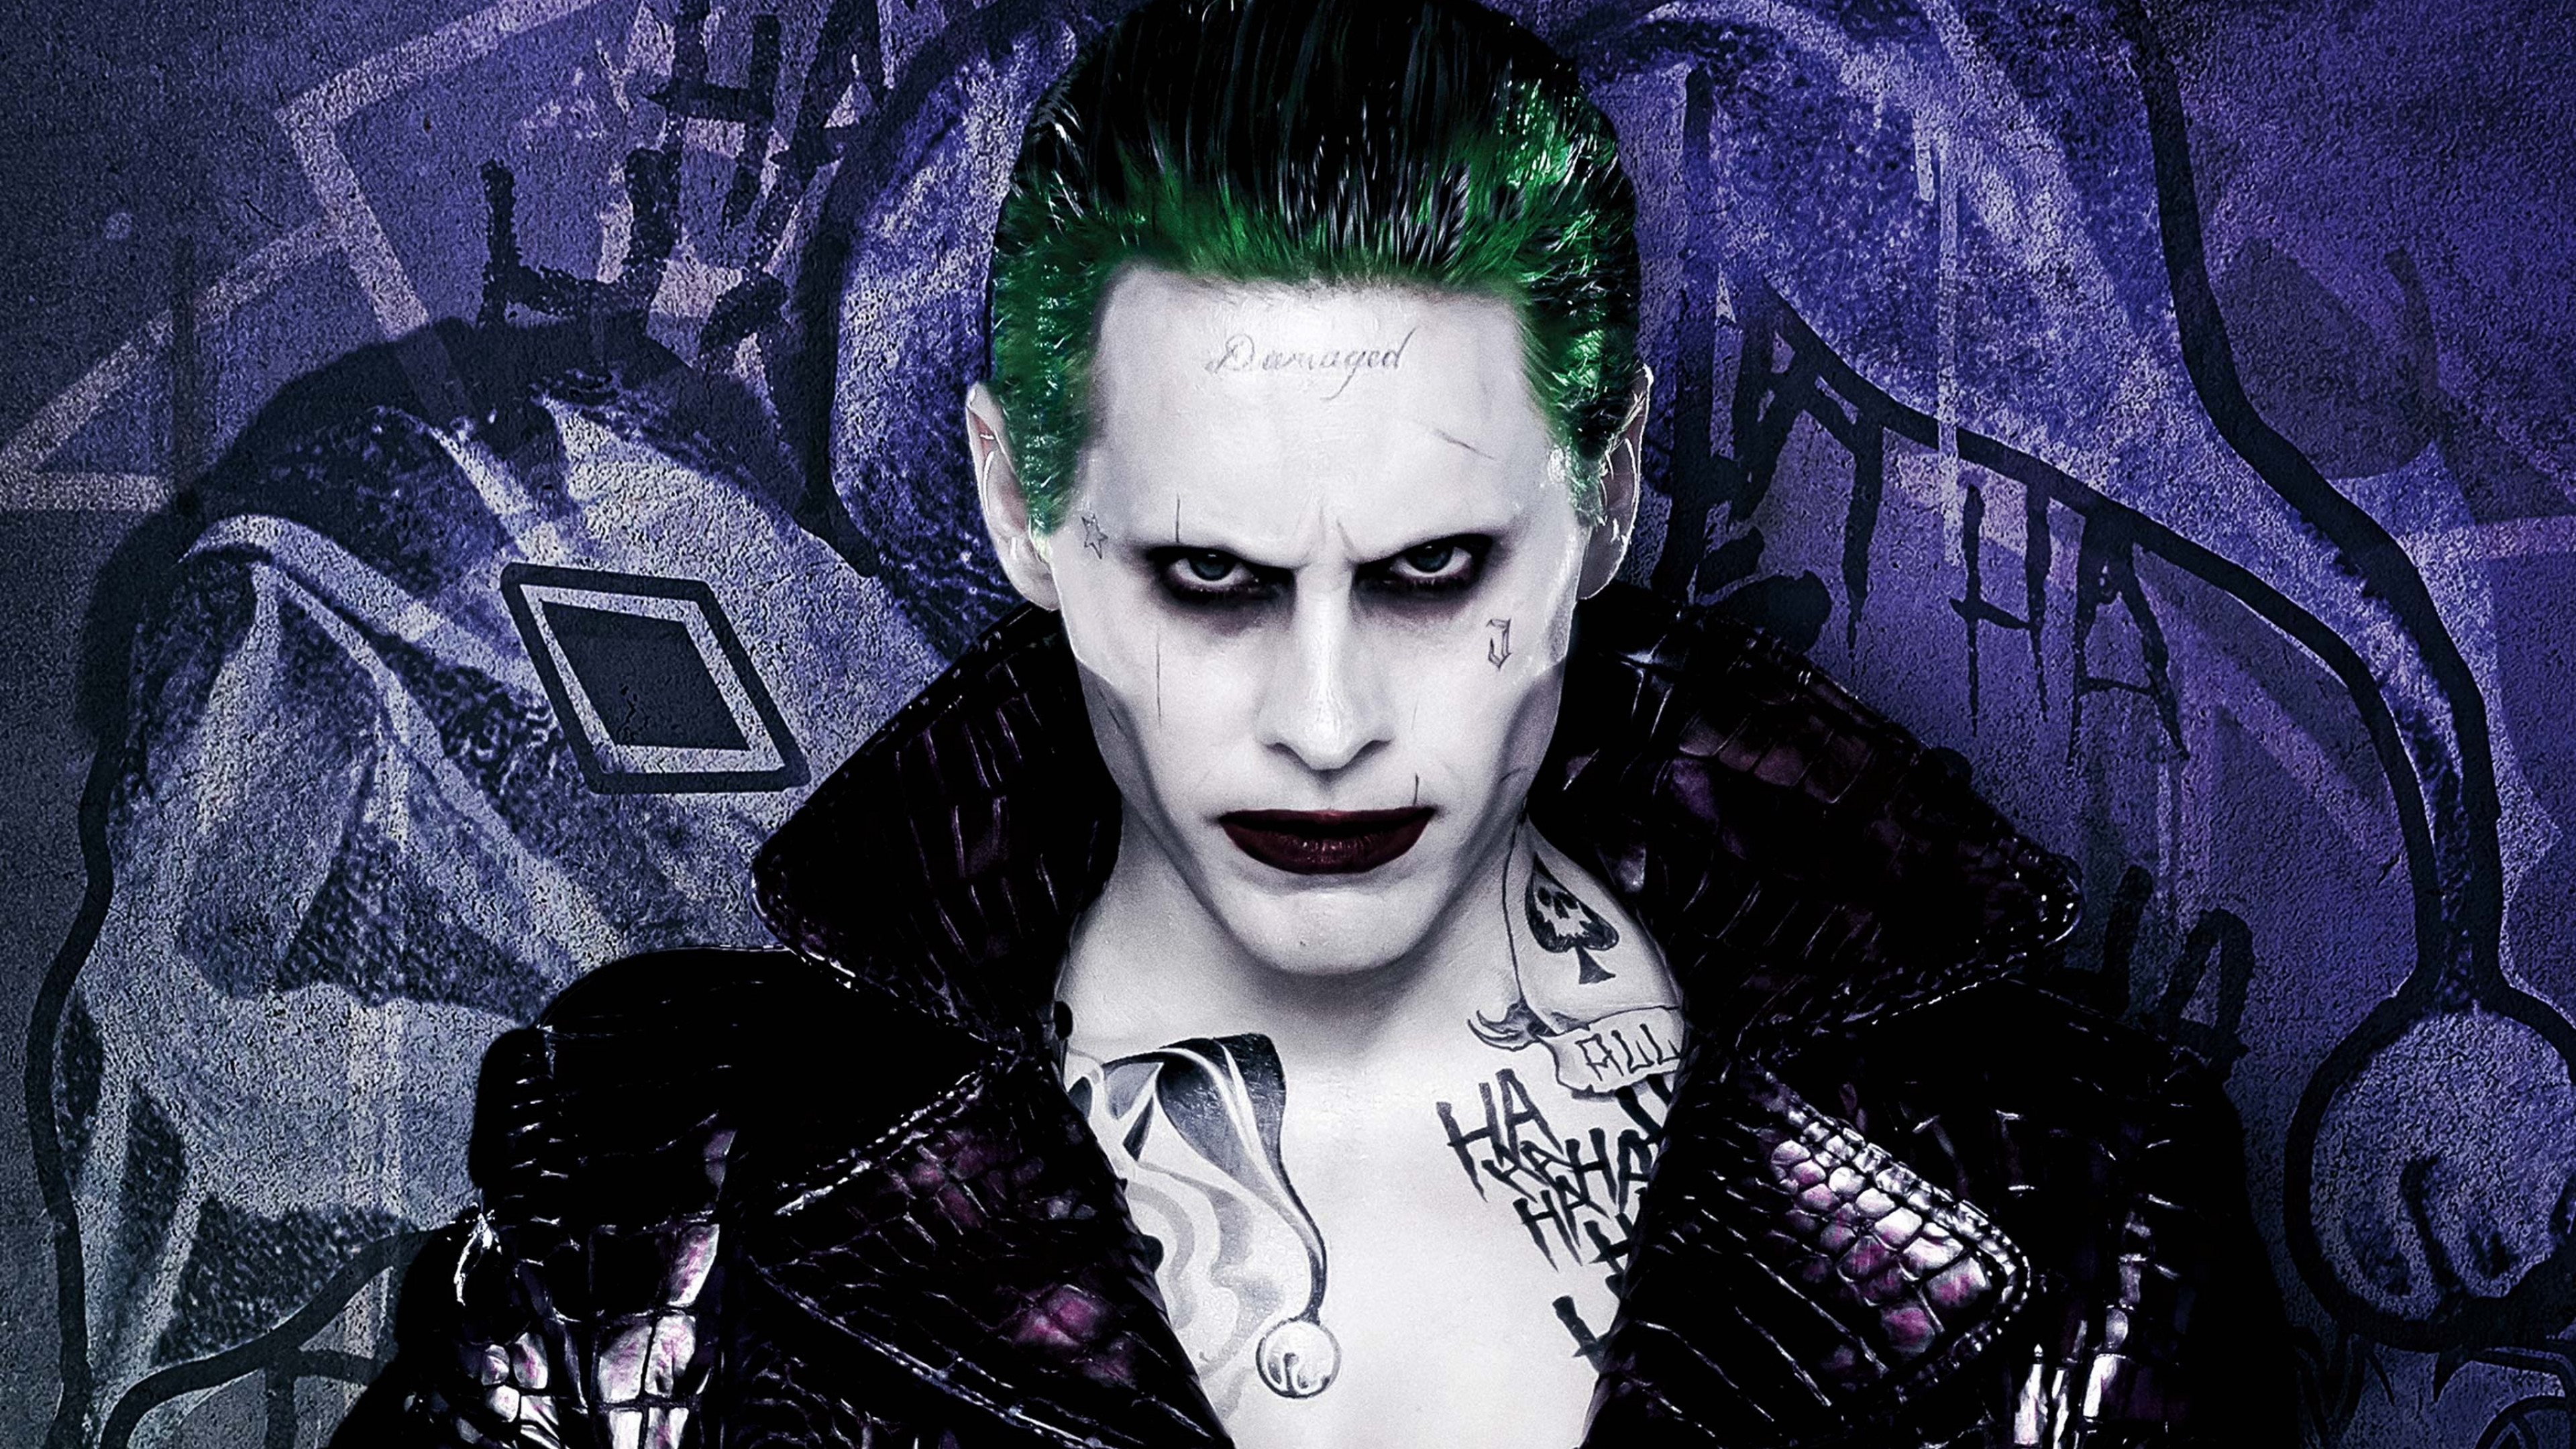 Wallpaper Suicide Squad: Jared Leto, Joker, Best Movies of 2016, Movies  #11415